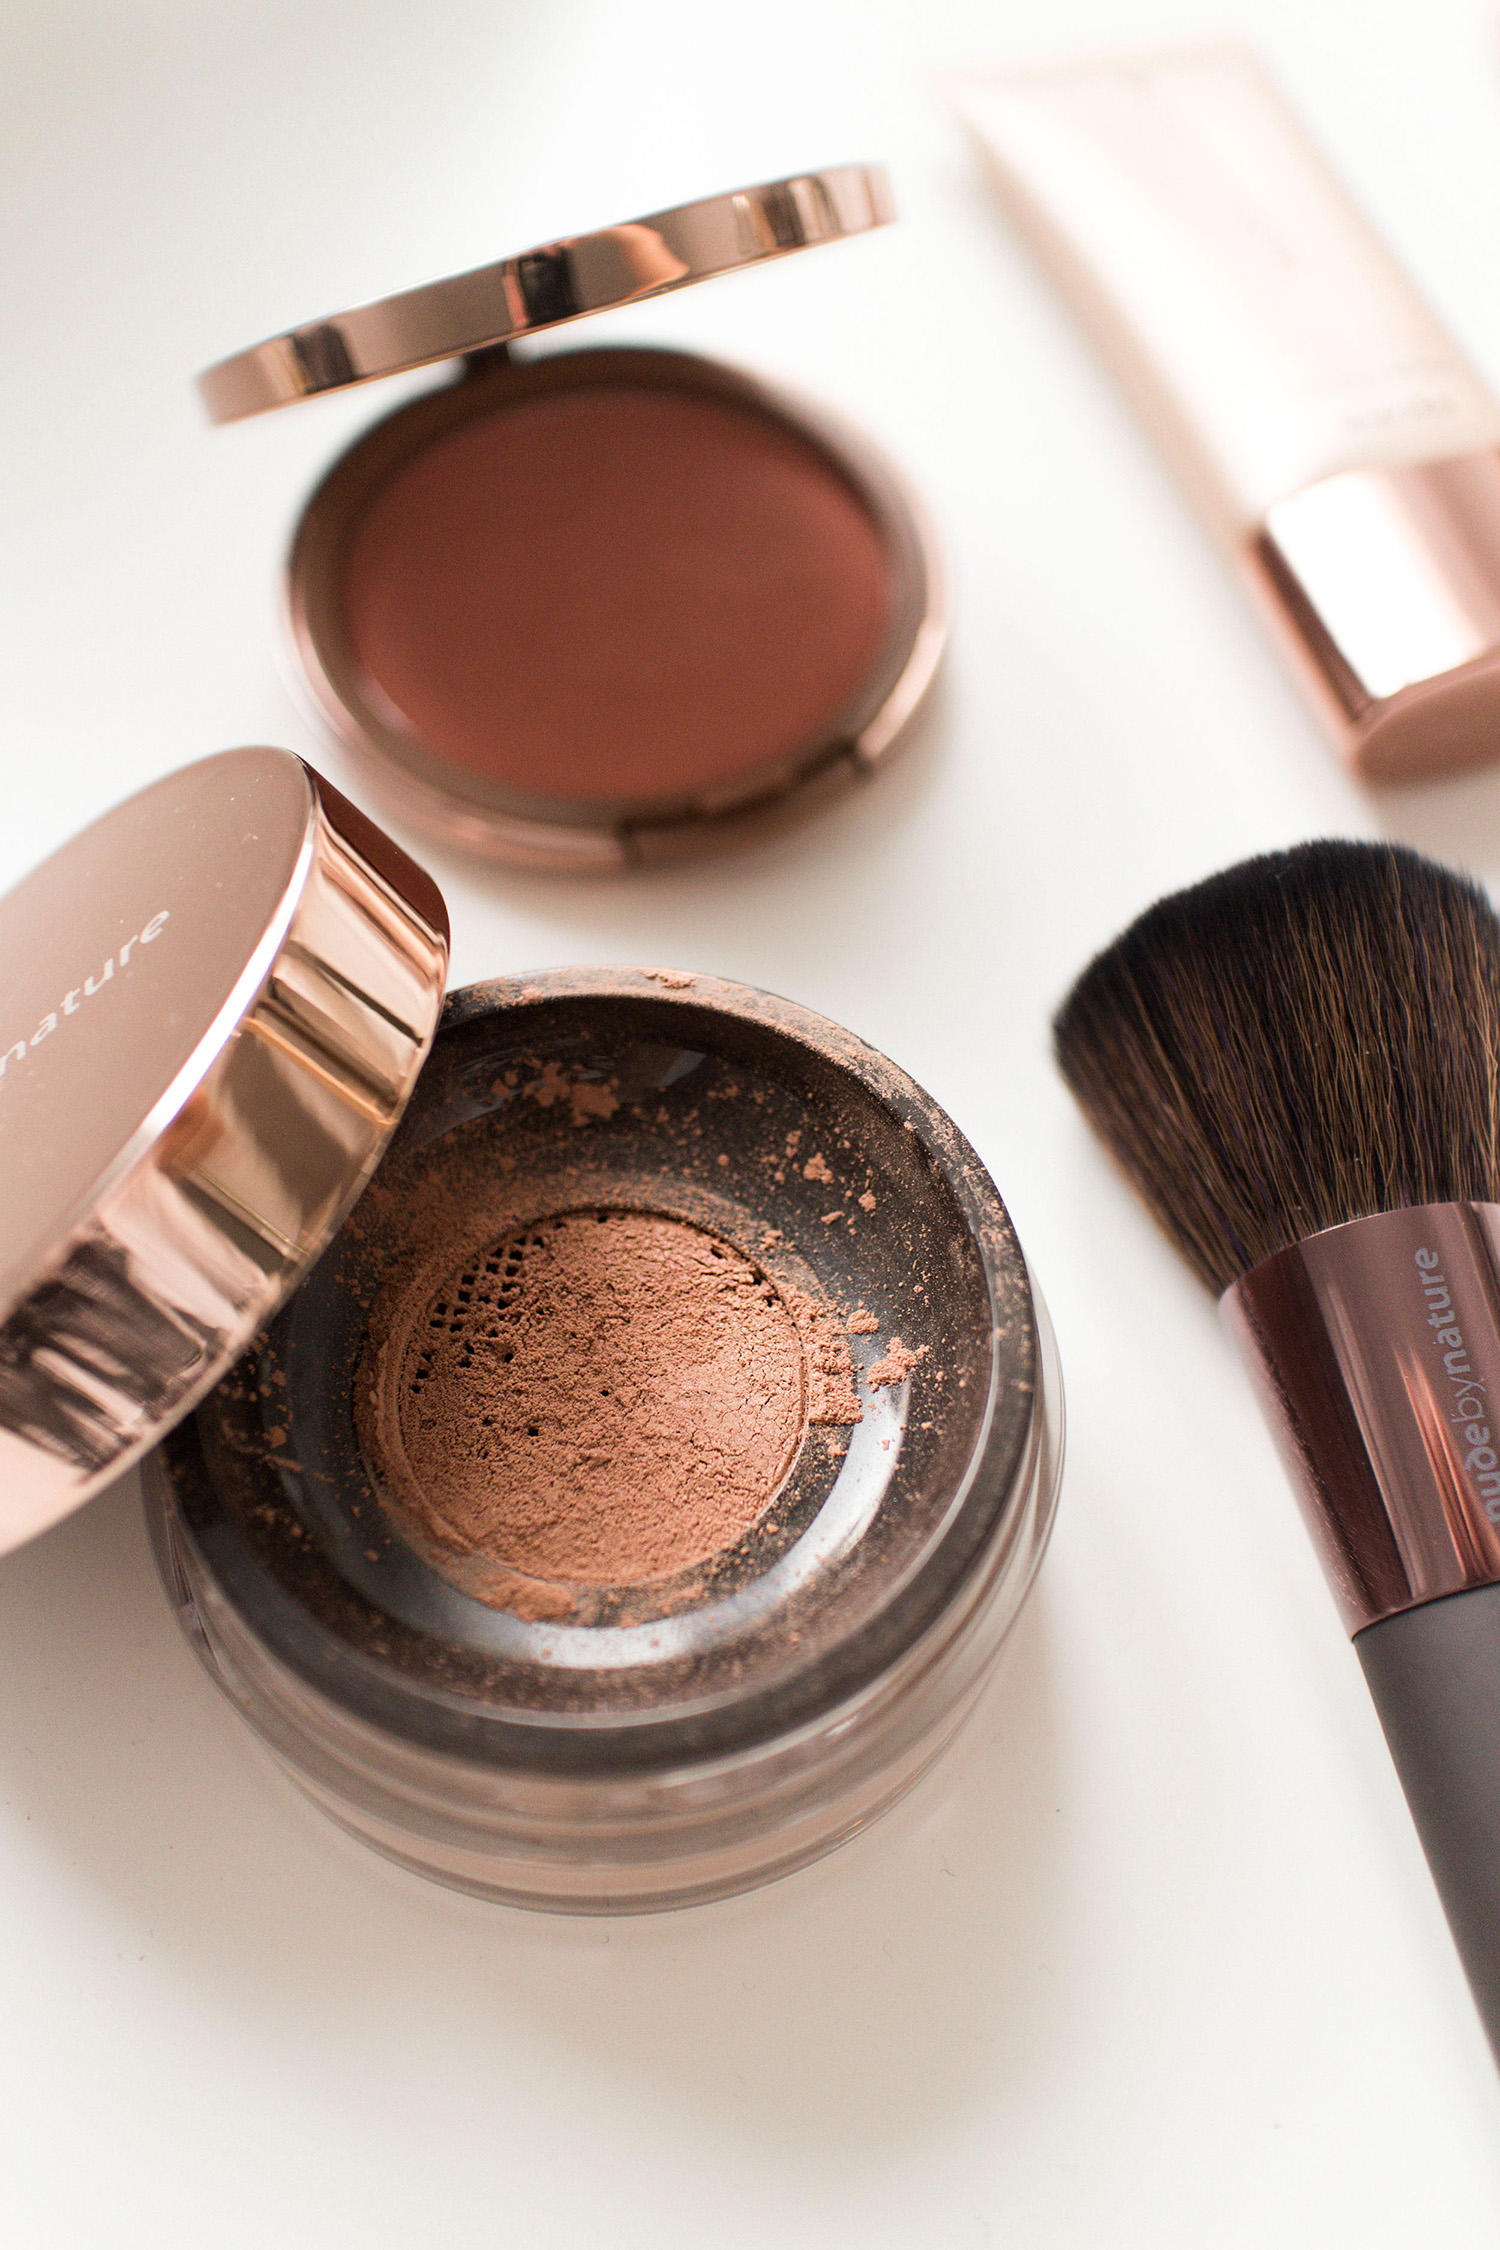 Nude by Nature Christmas Collection Set Review: Natural Glow Loose Bronzer – 01 Bondi Bronze